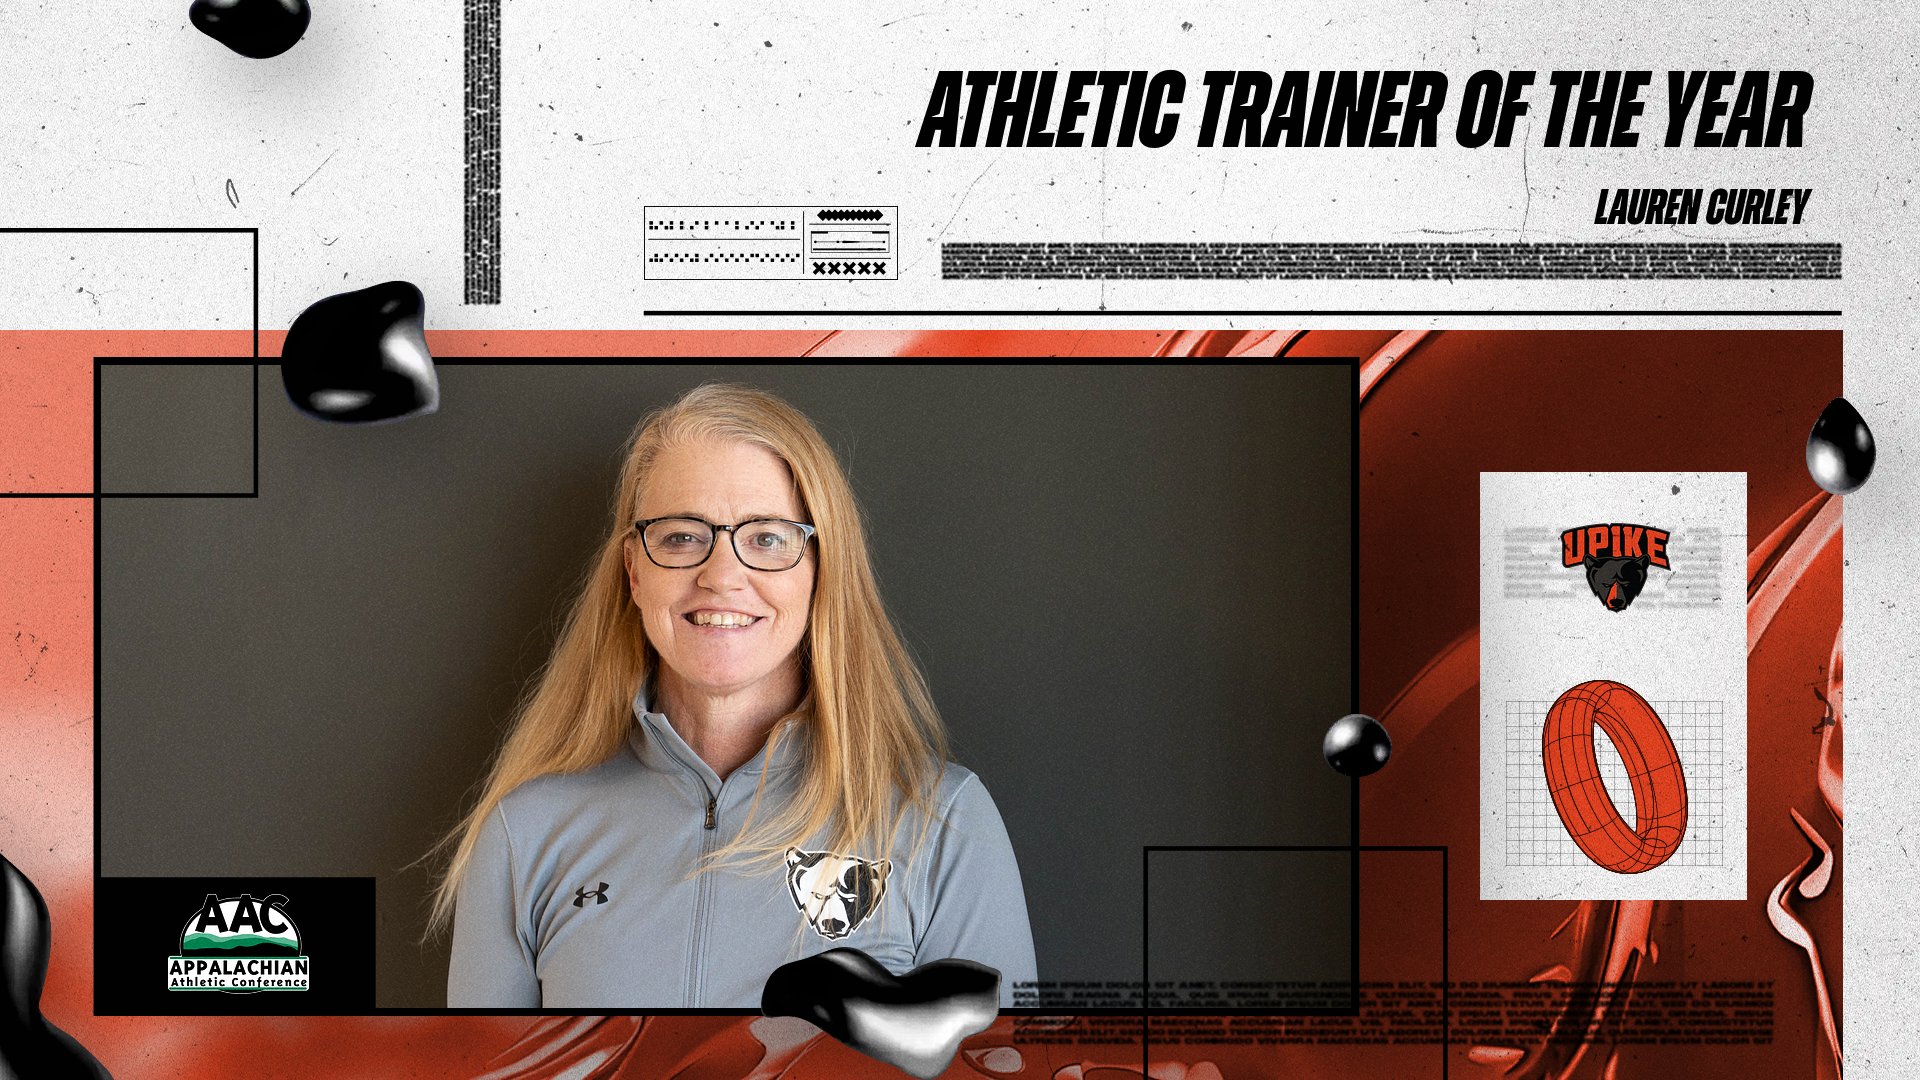 Pikeville's Curley Named AAC Athletic Trainer of the Year